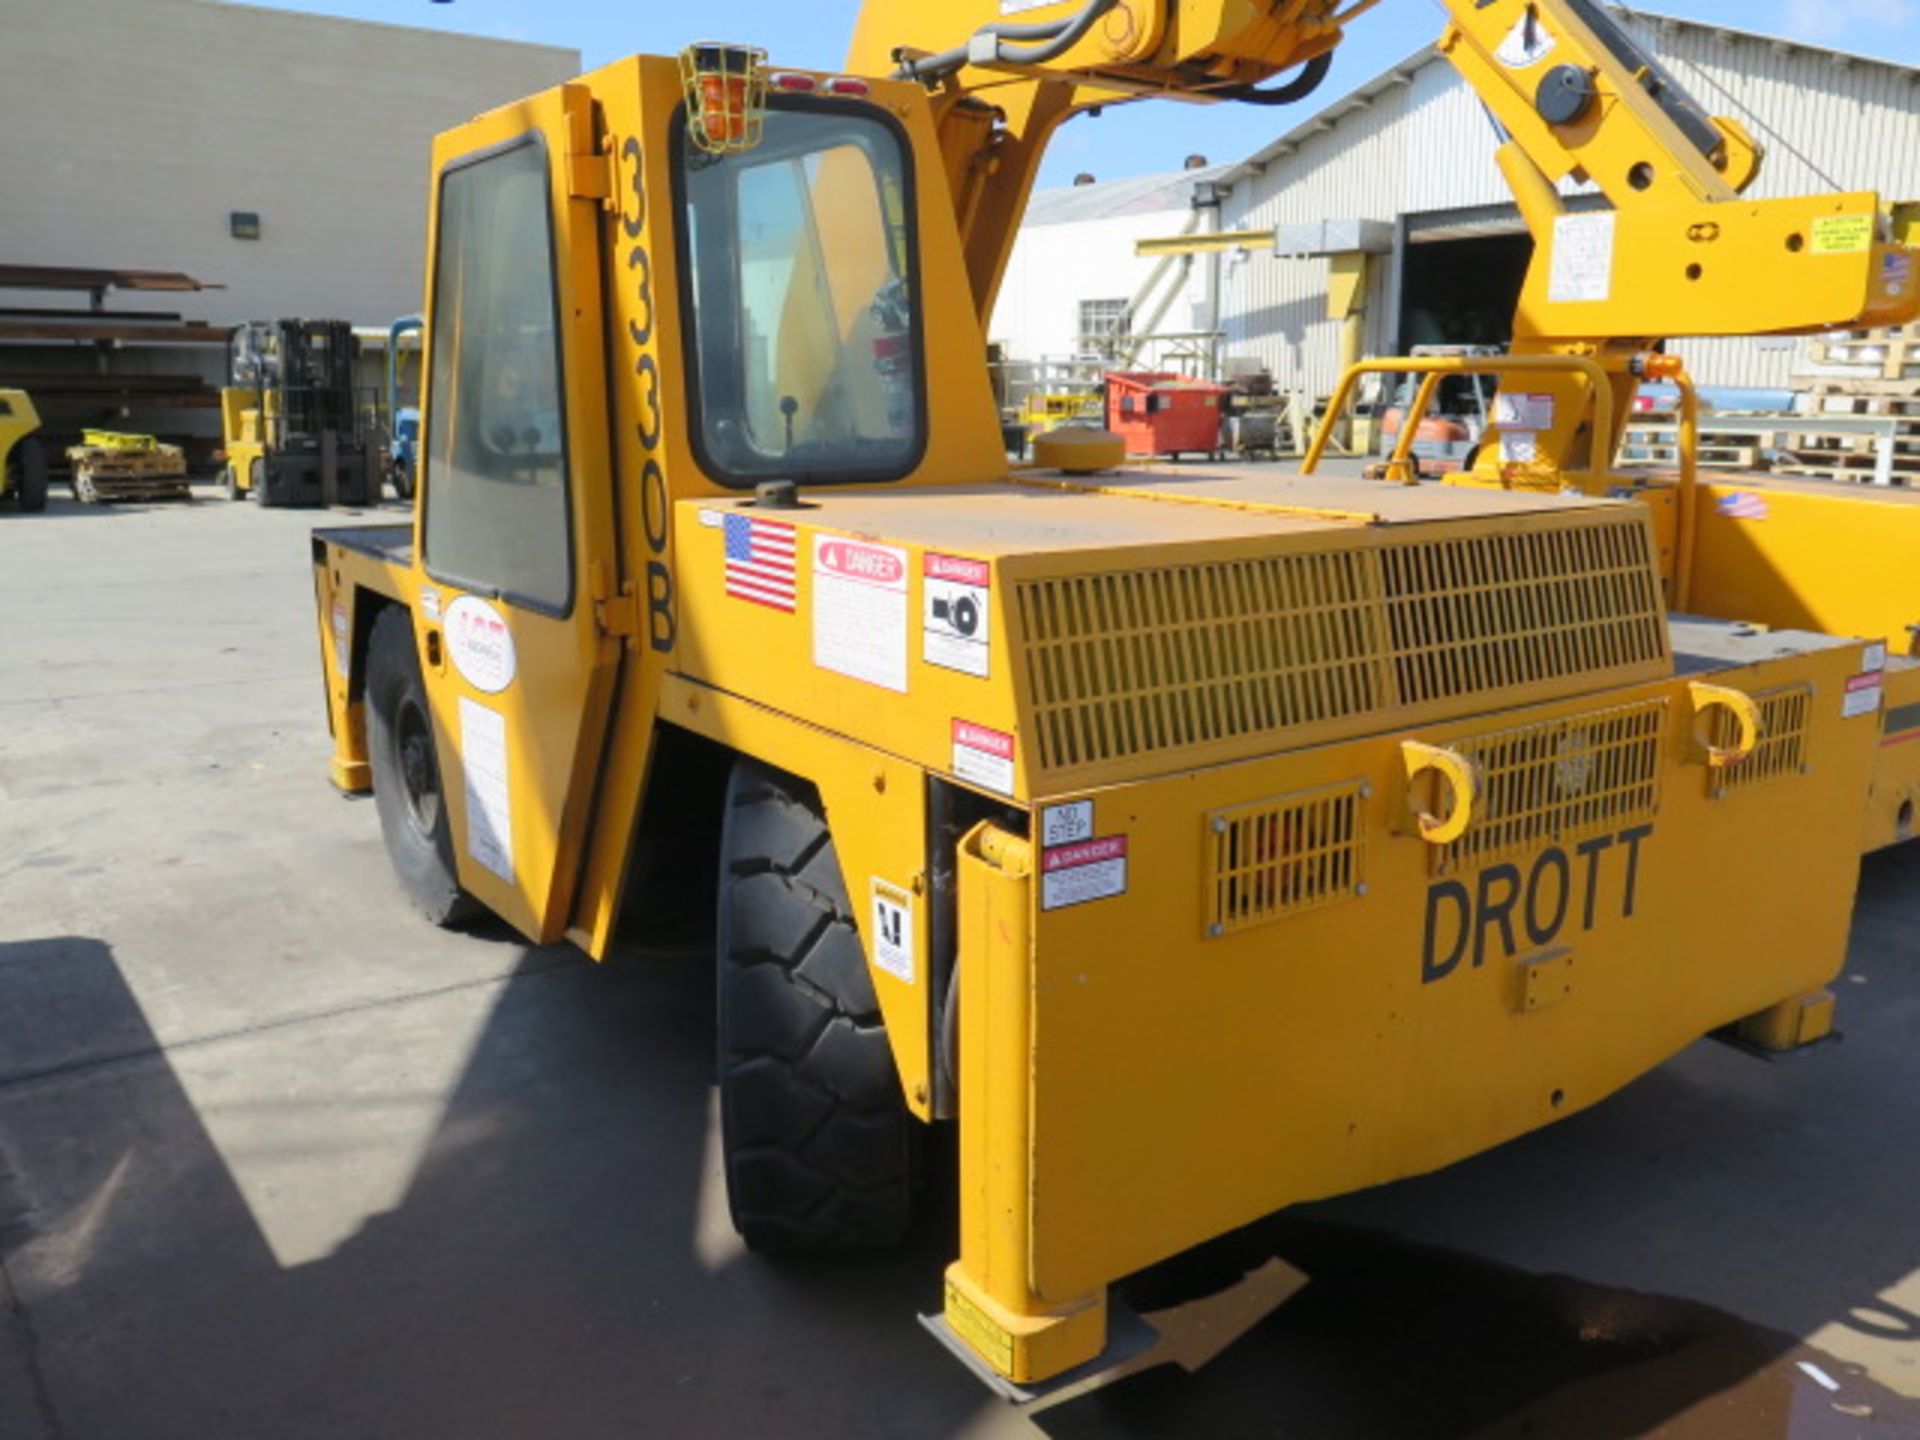 Drott 3330 12,000 Lb Cap (On Outriggers) Diesel Carry Deck Crane s/n 6225056 w/ 34’ Lift, SOLD AS IS - Image 7 of 23